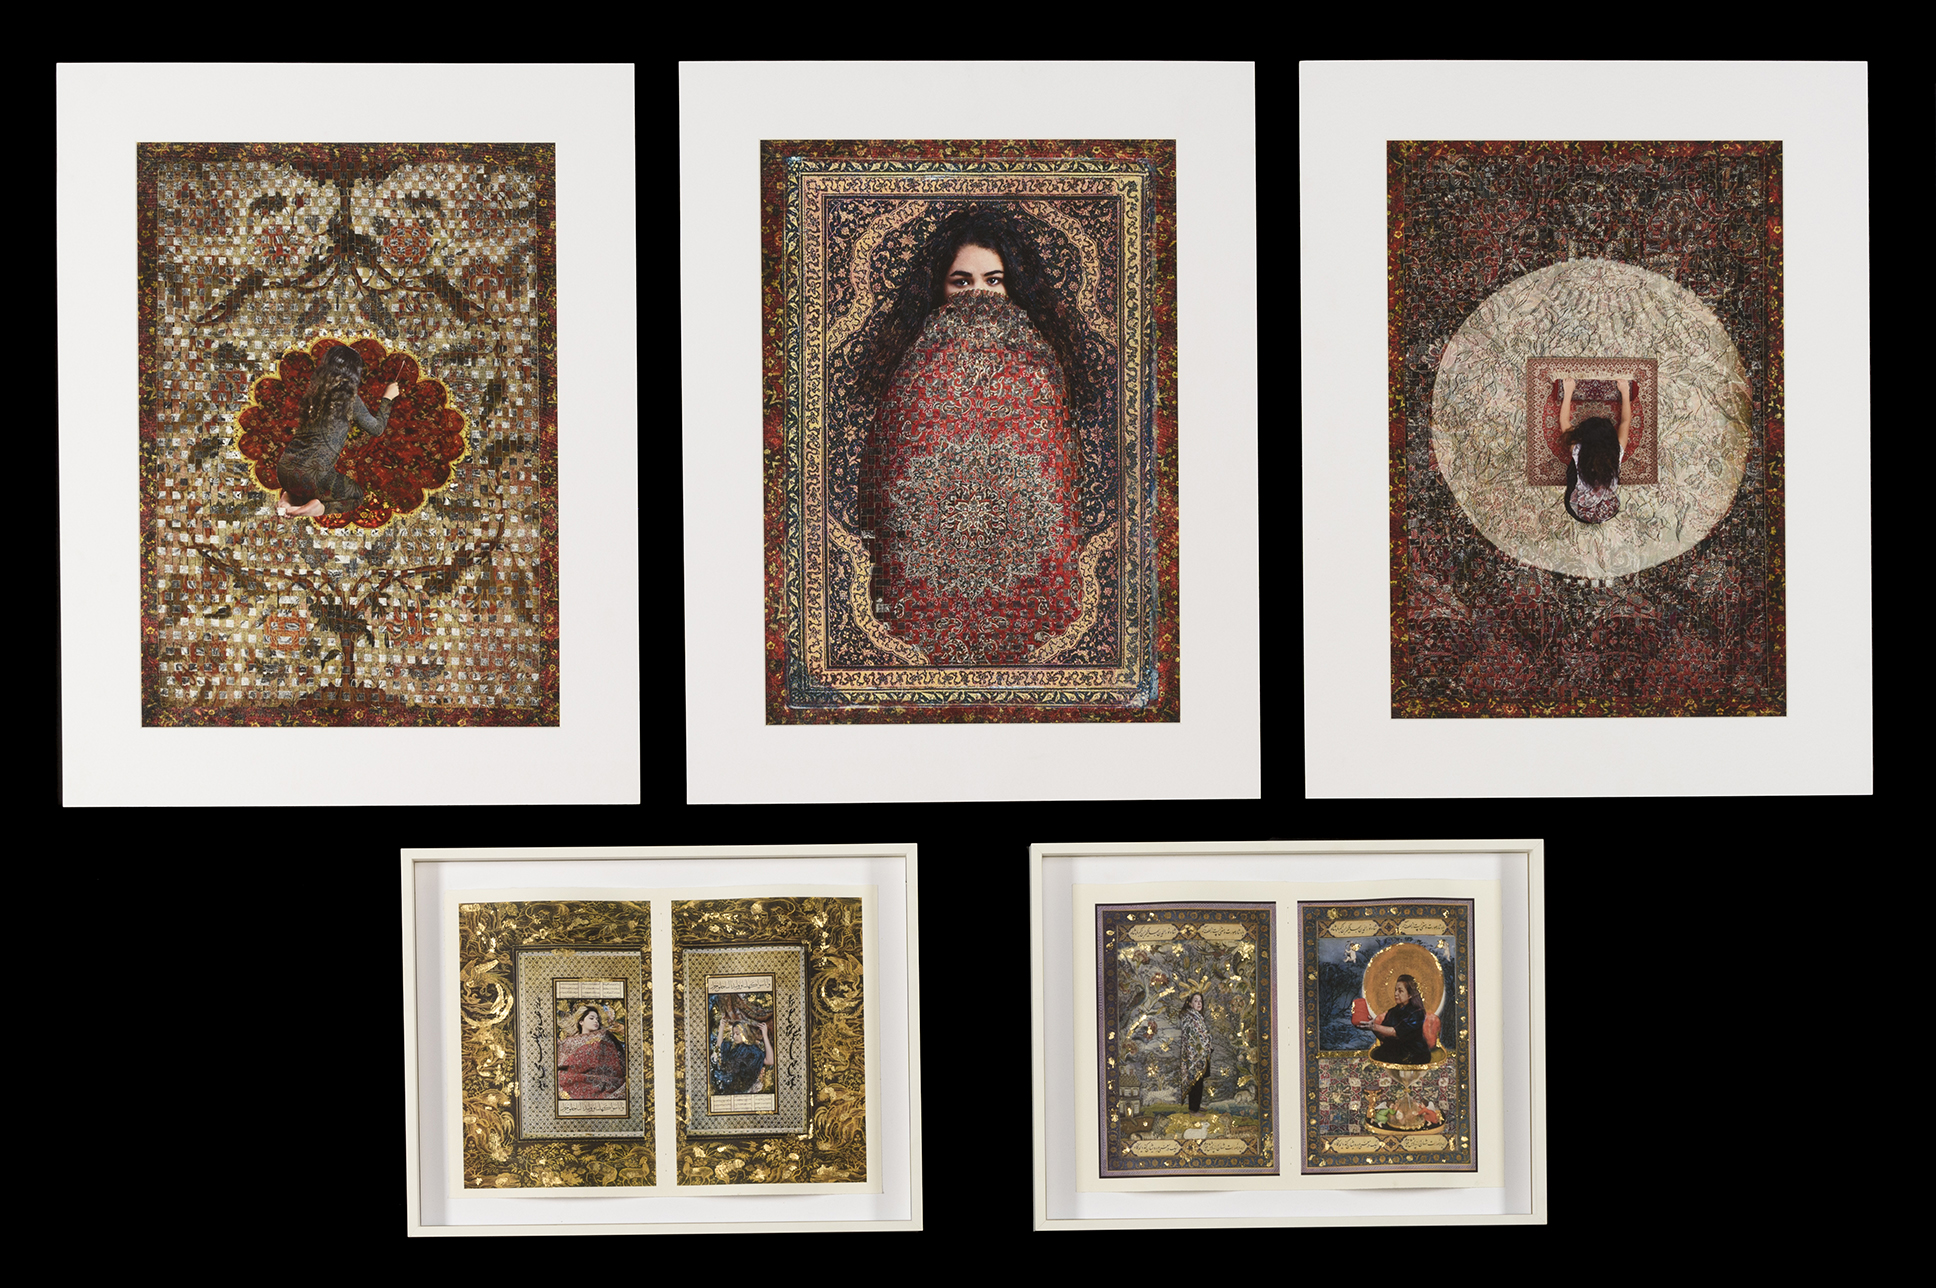 Three large intricate works on paper and four smaller ones, the colours of red and gold are prominent in each.